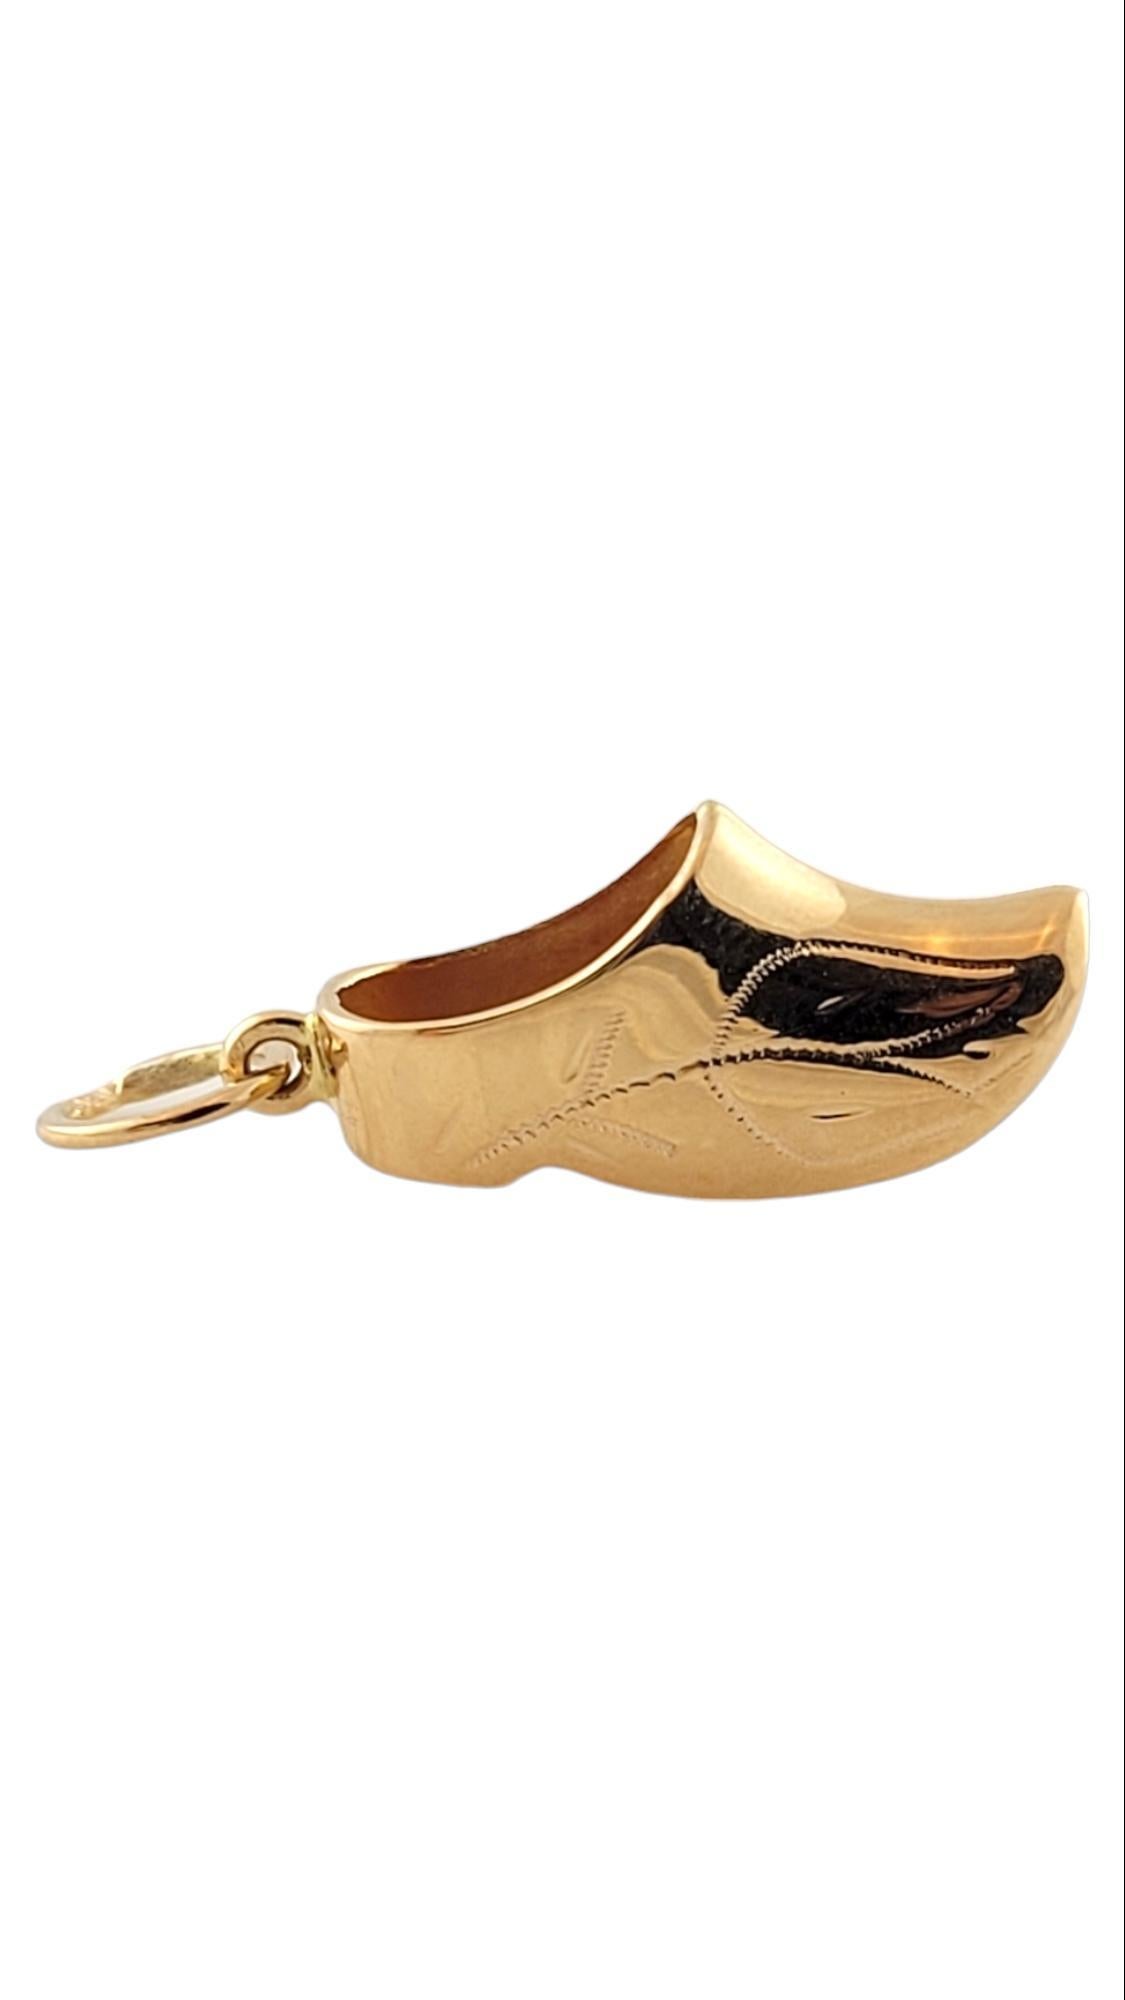 Beautiful Dutch shoe charm is made in 18k yellow gold and features small details of a tulip on both sides of the shoe.

Size: 23mm X 10mm

Weight: 1.6 gr / 1.0 dwt

Hallmark: 18K

Very good condition, professionally polished.

Will come packaged in